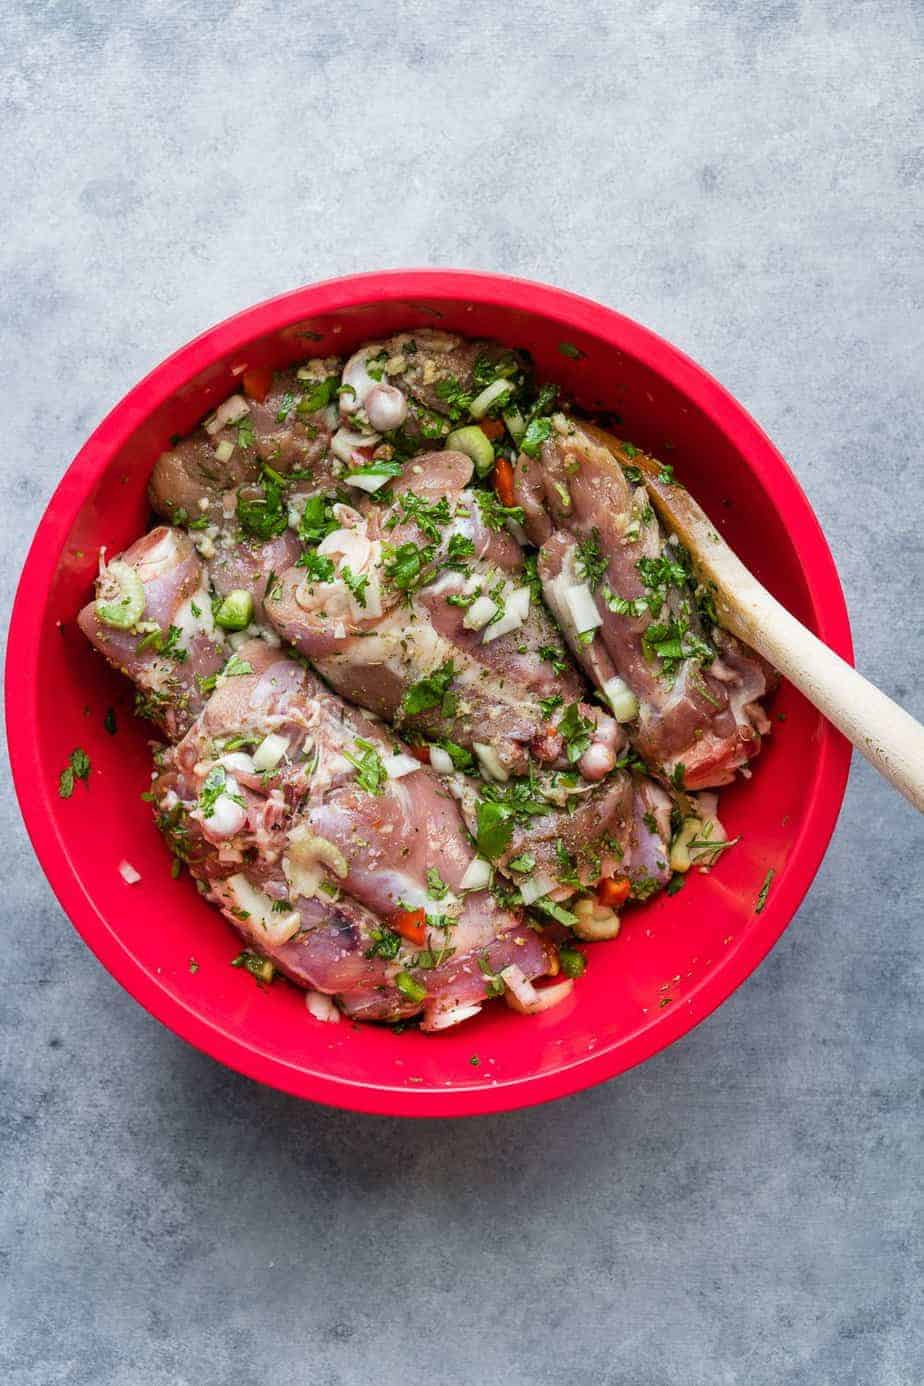 Stir the turkey thighs with the ingredients until combined